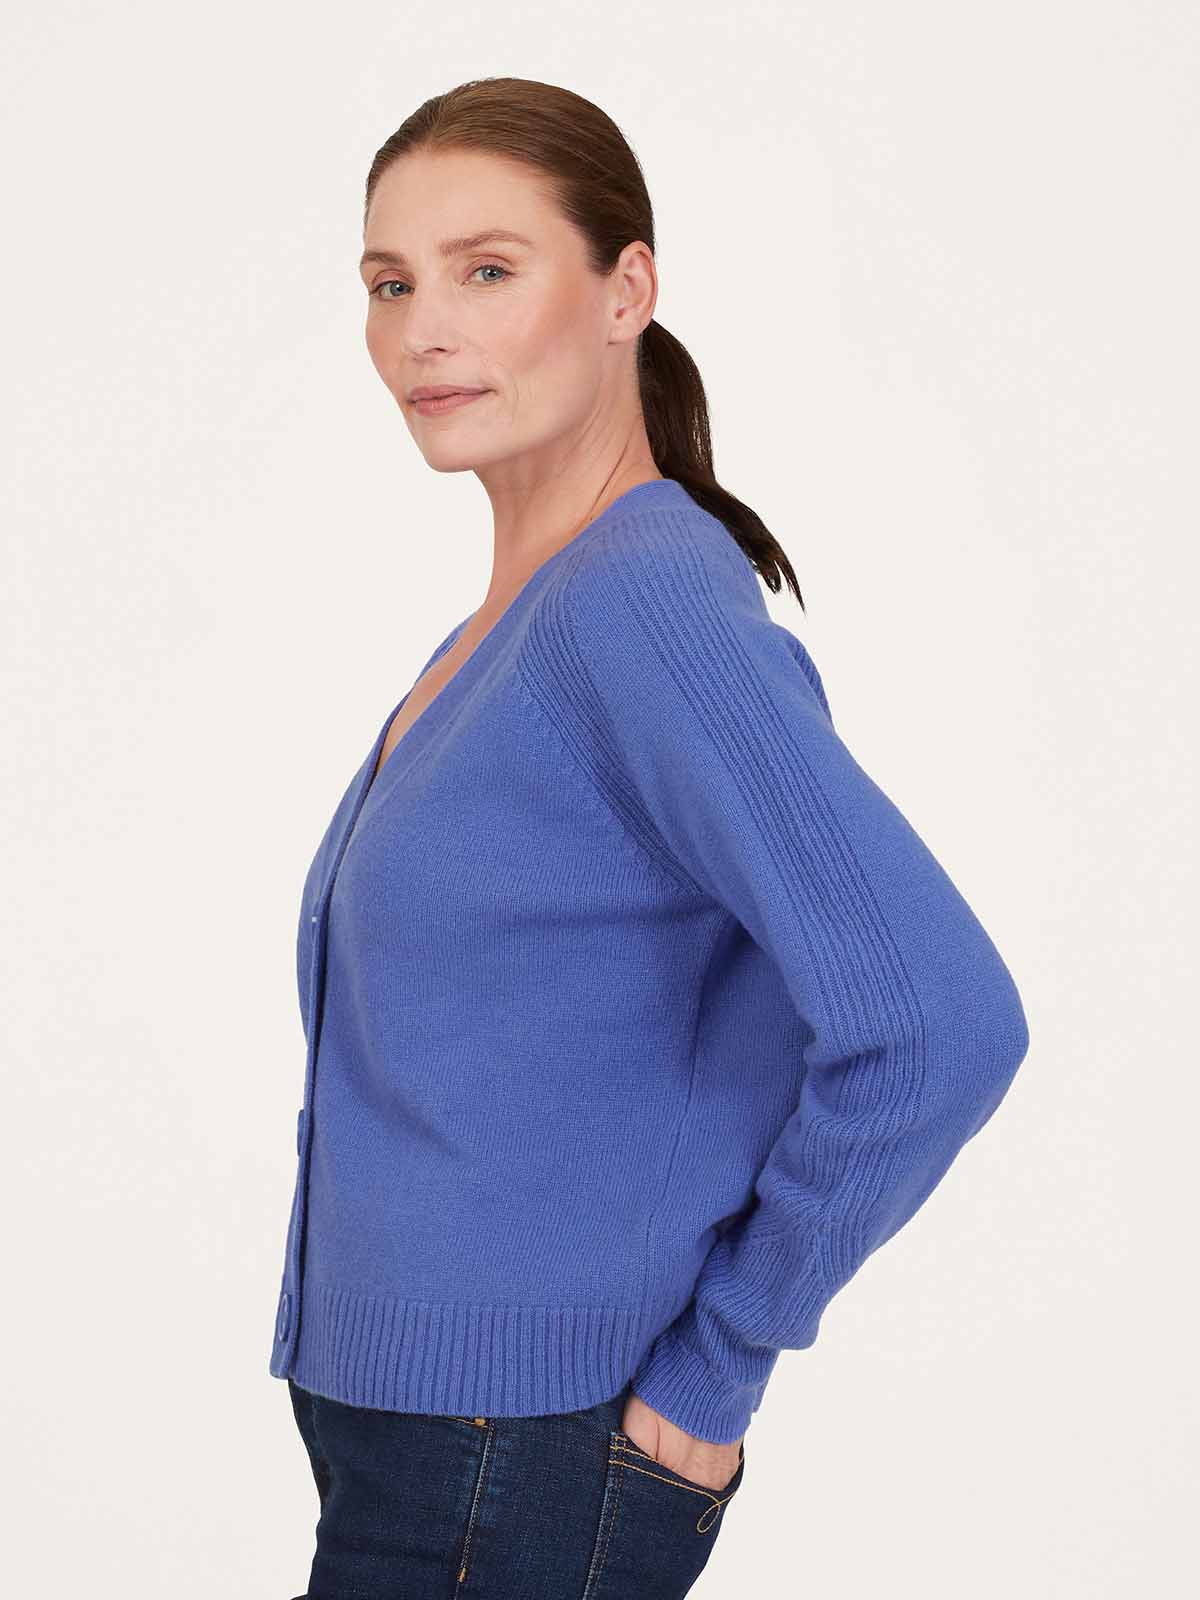 Taygete Lambswool V-Neck Cardigan - Periwinkle Blue